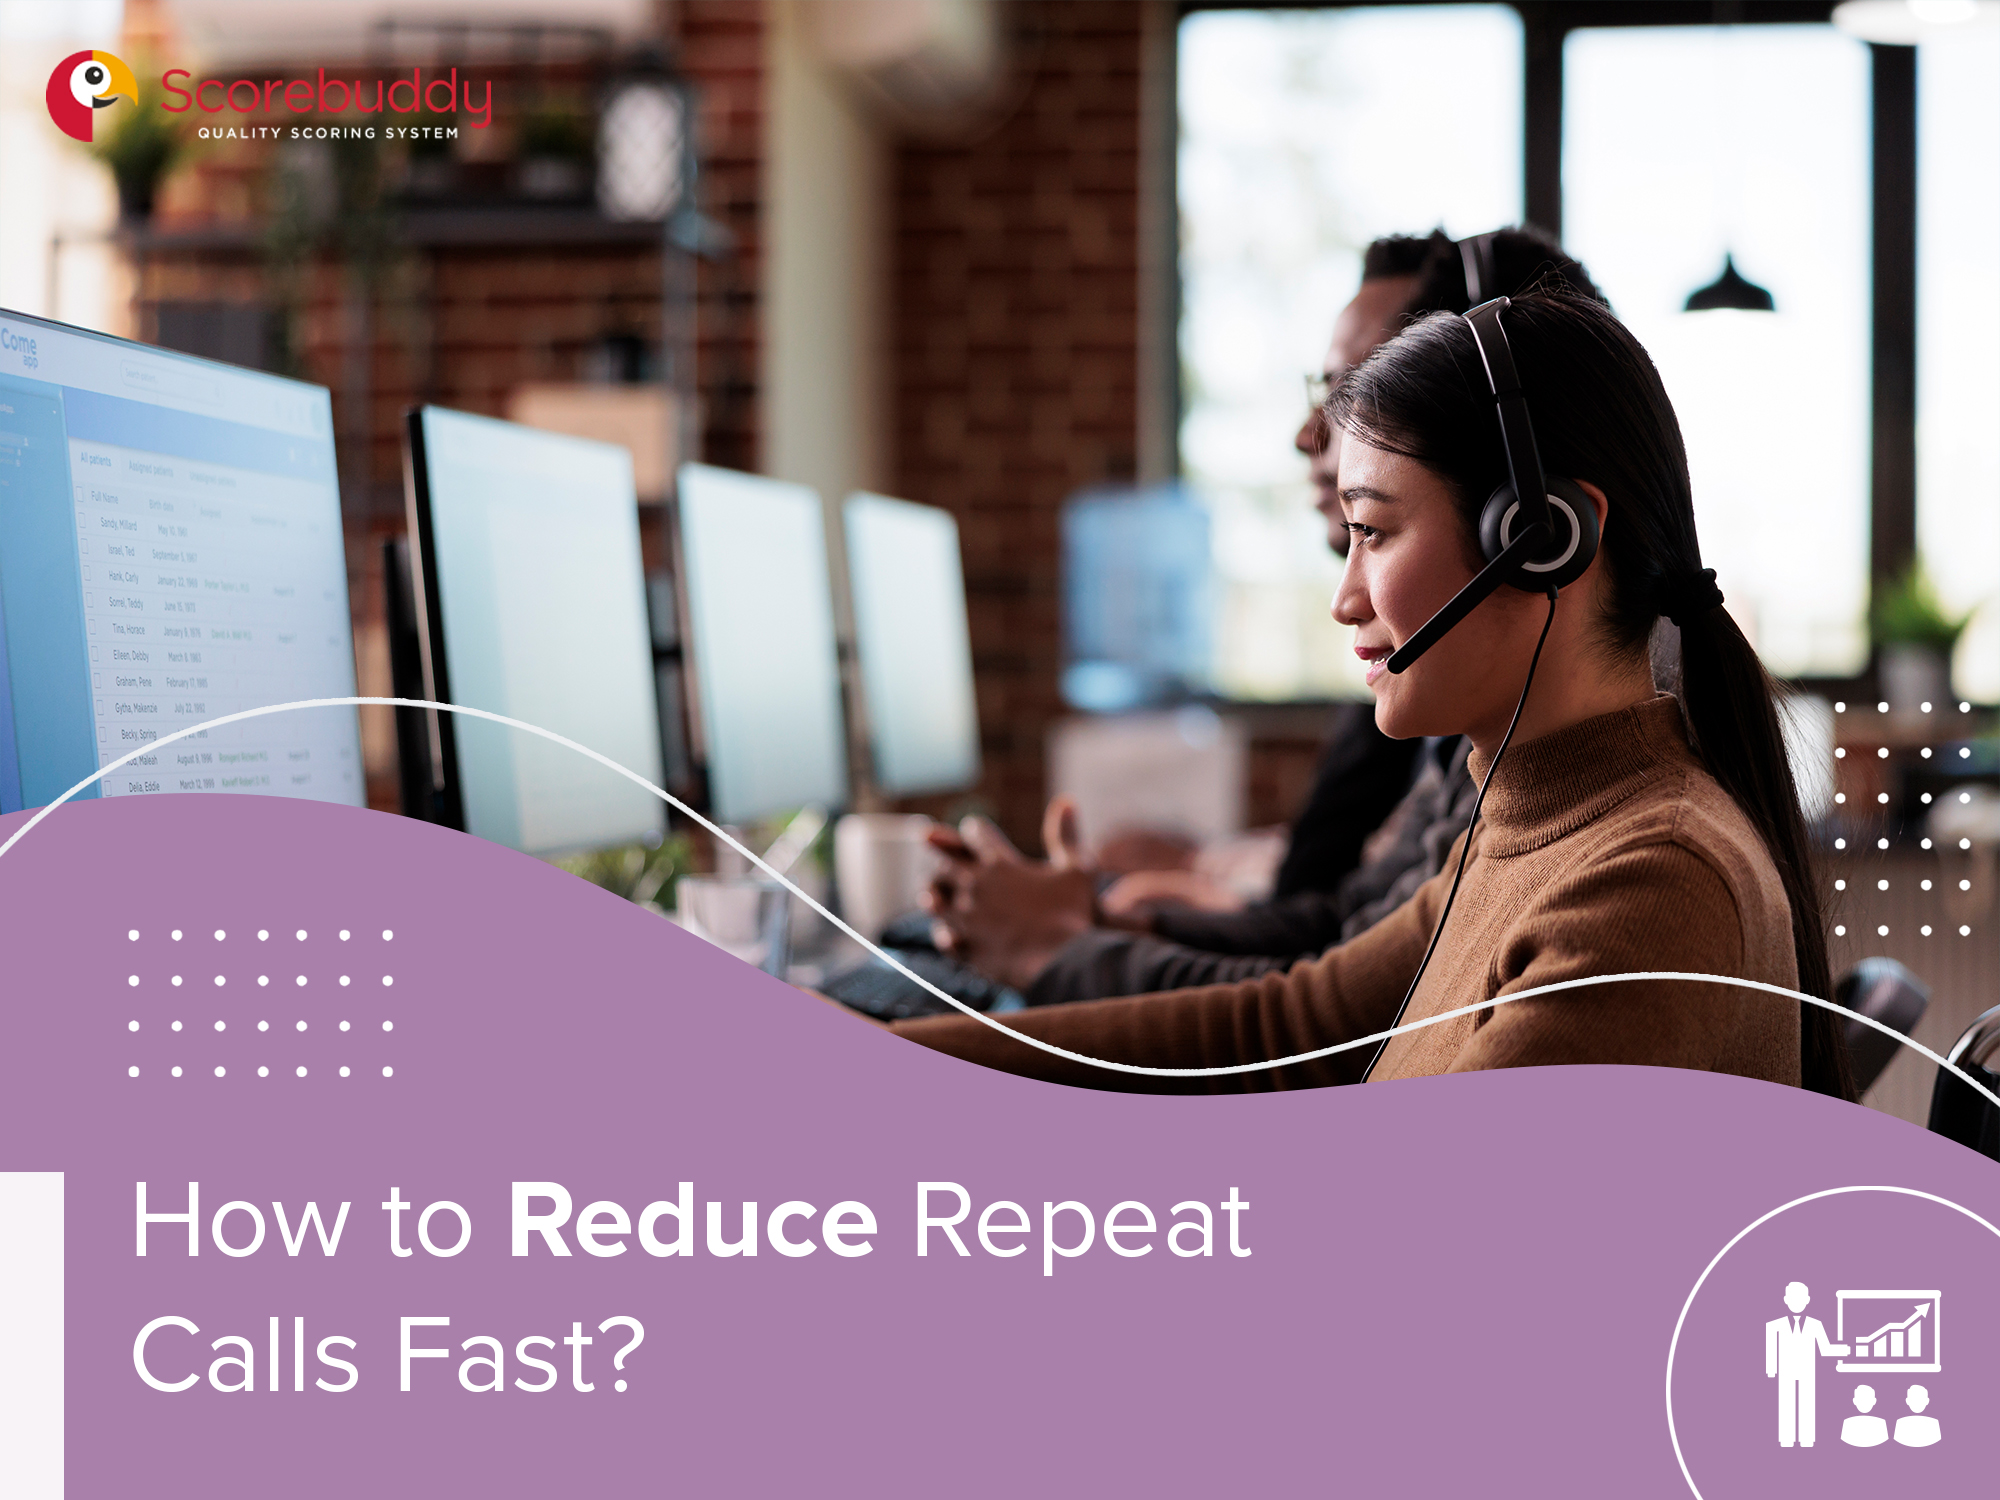 How to Reduce Repeat Calls Fast?